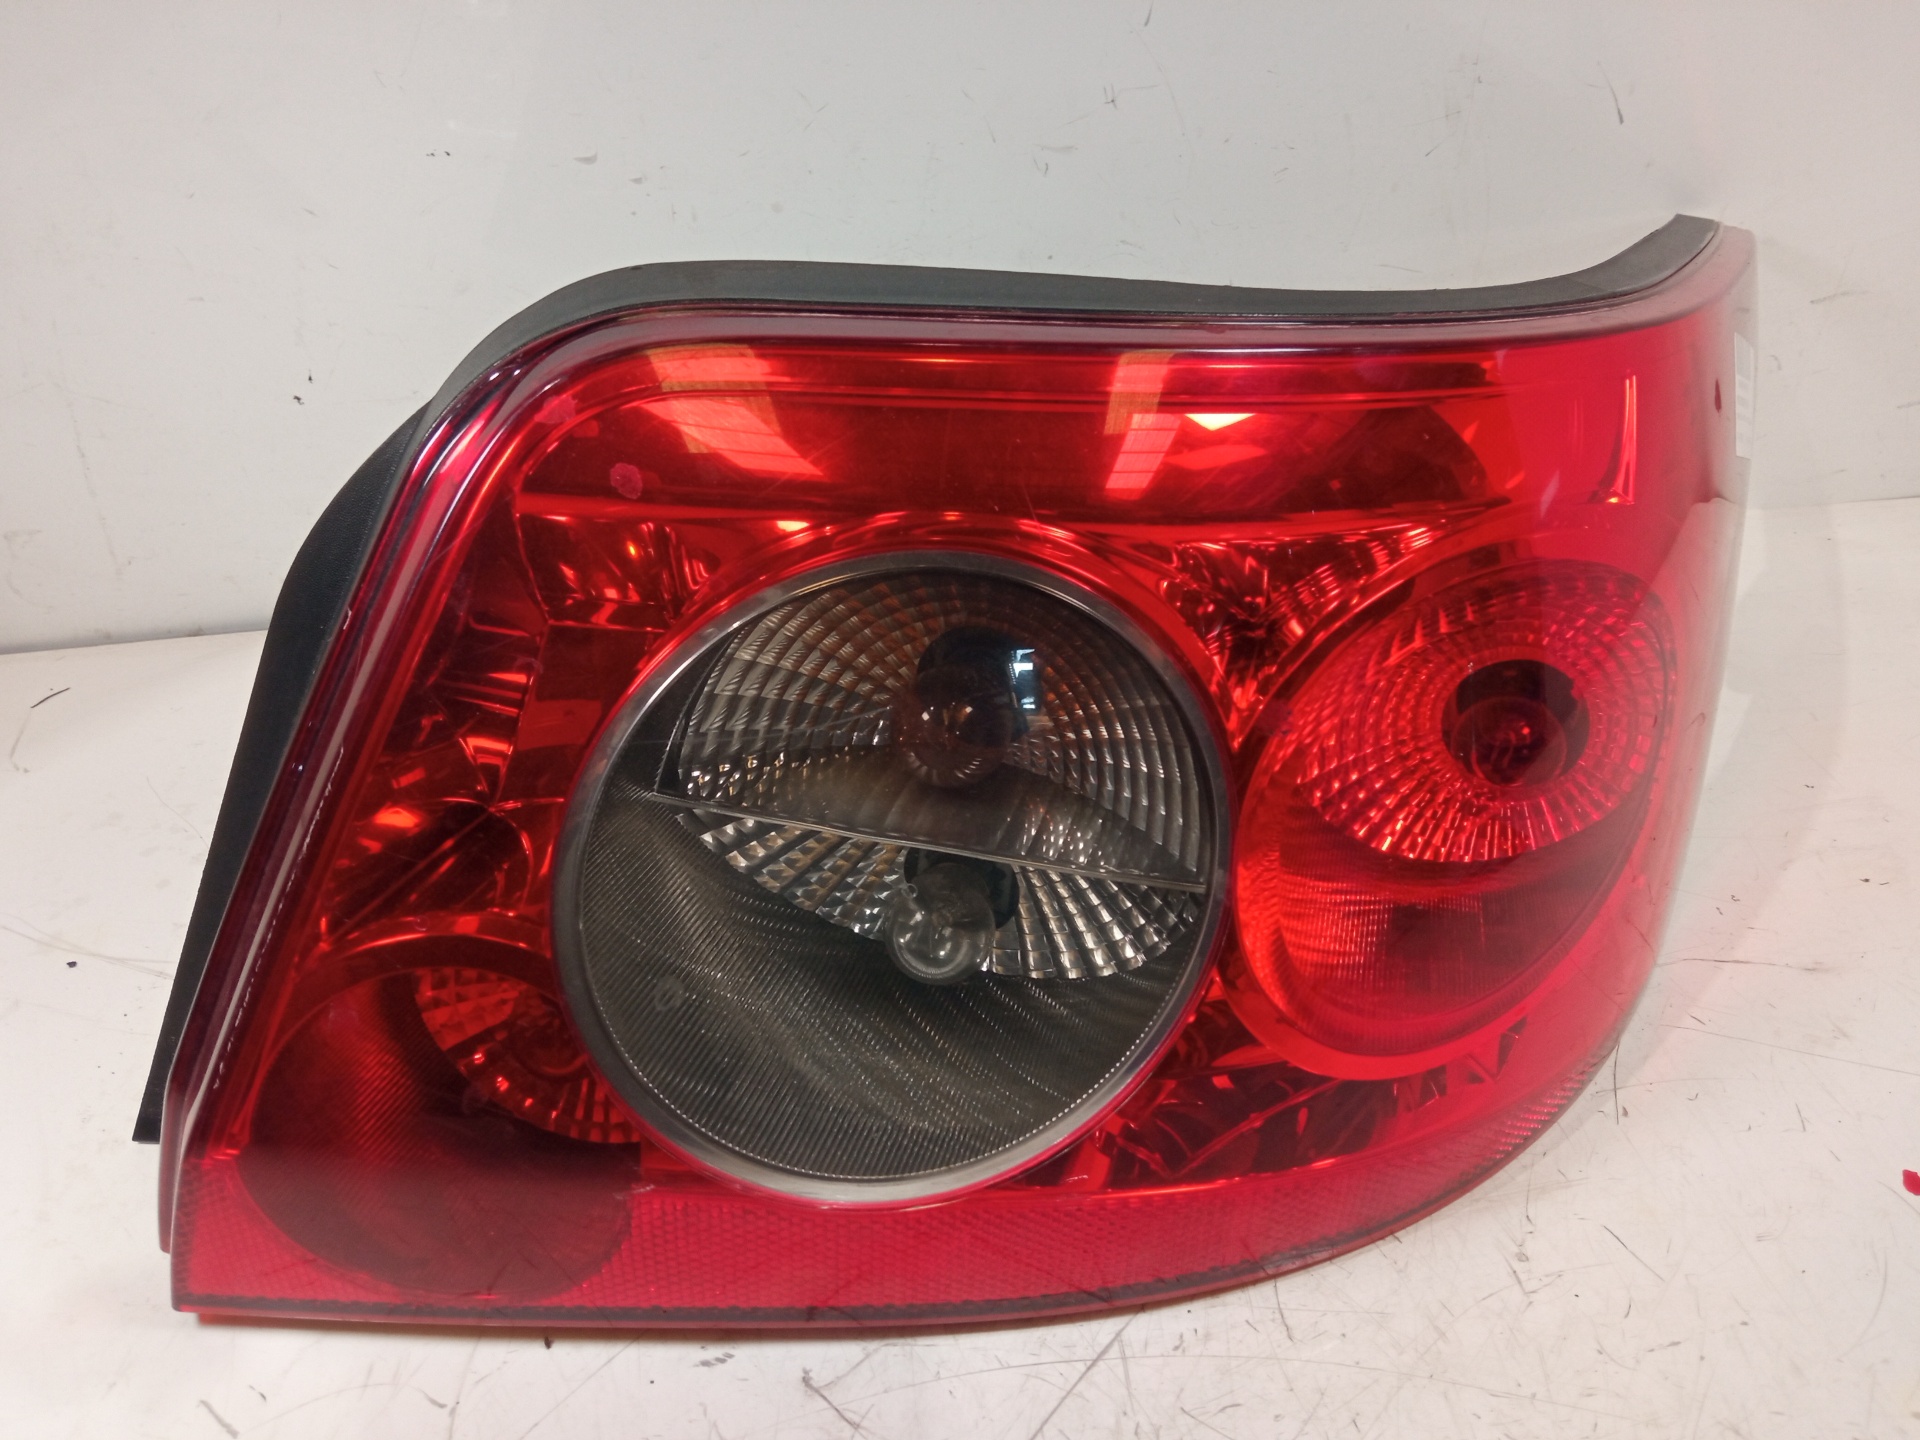 RENAULT Megane 2 generation (2002-2012) Rear Right Taillight Lamp 8200142687, 6PINES 24869412